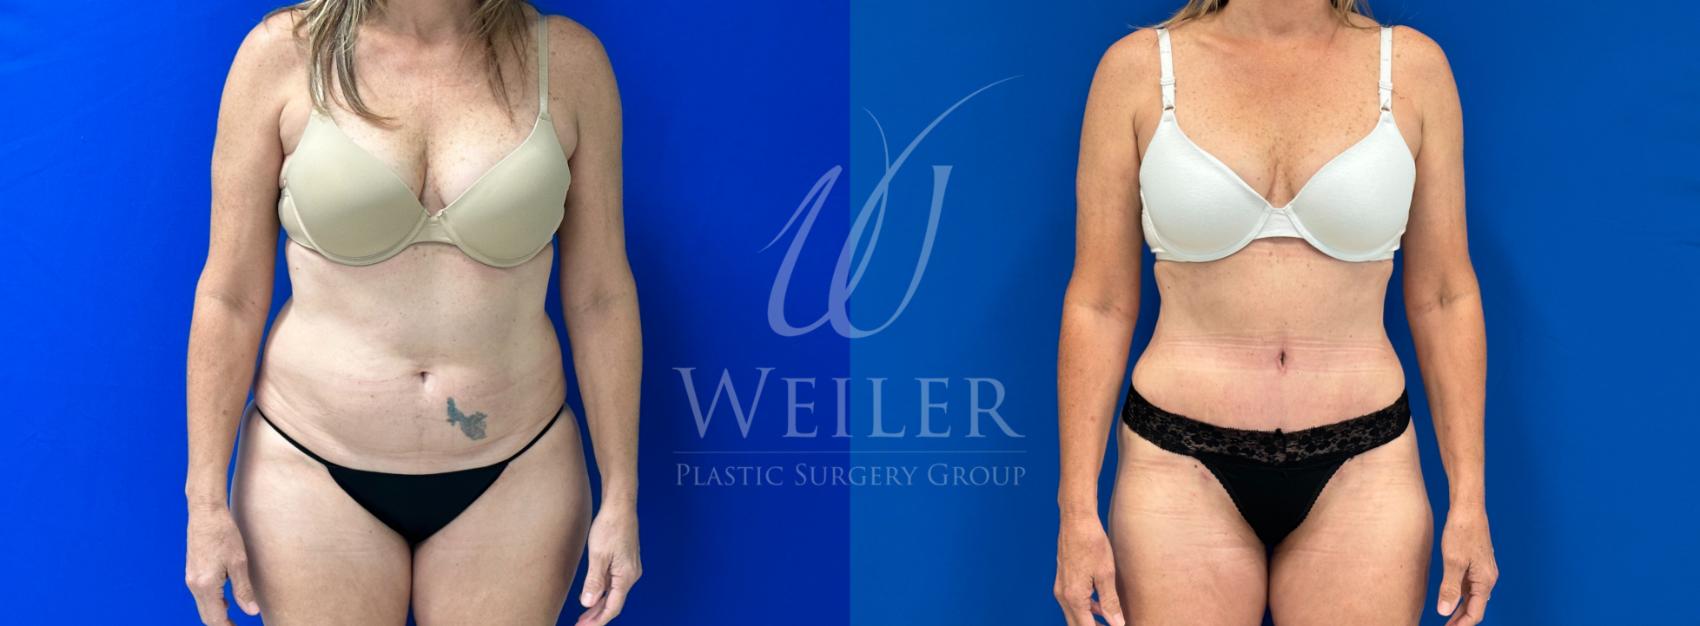 Before & After Tummy Tuck Case 1114 Front View in Baton Rouge, New Orleans, & Lafayette, Louisiana